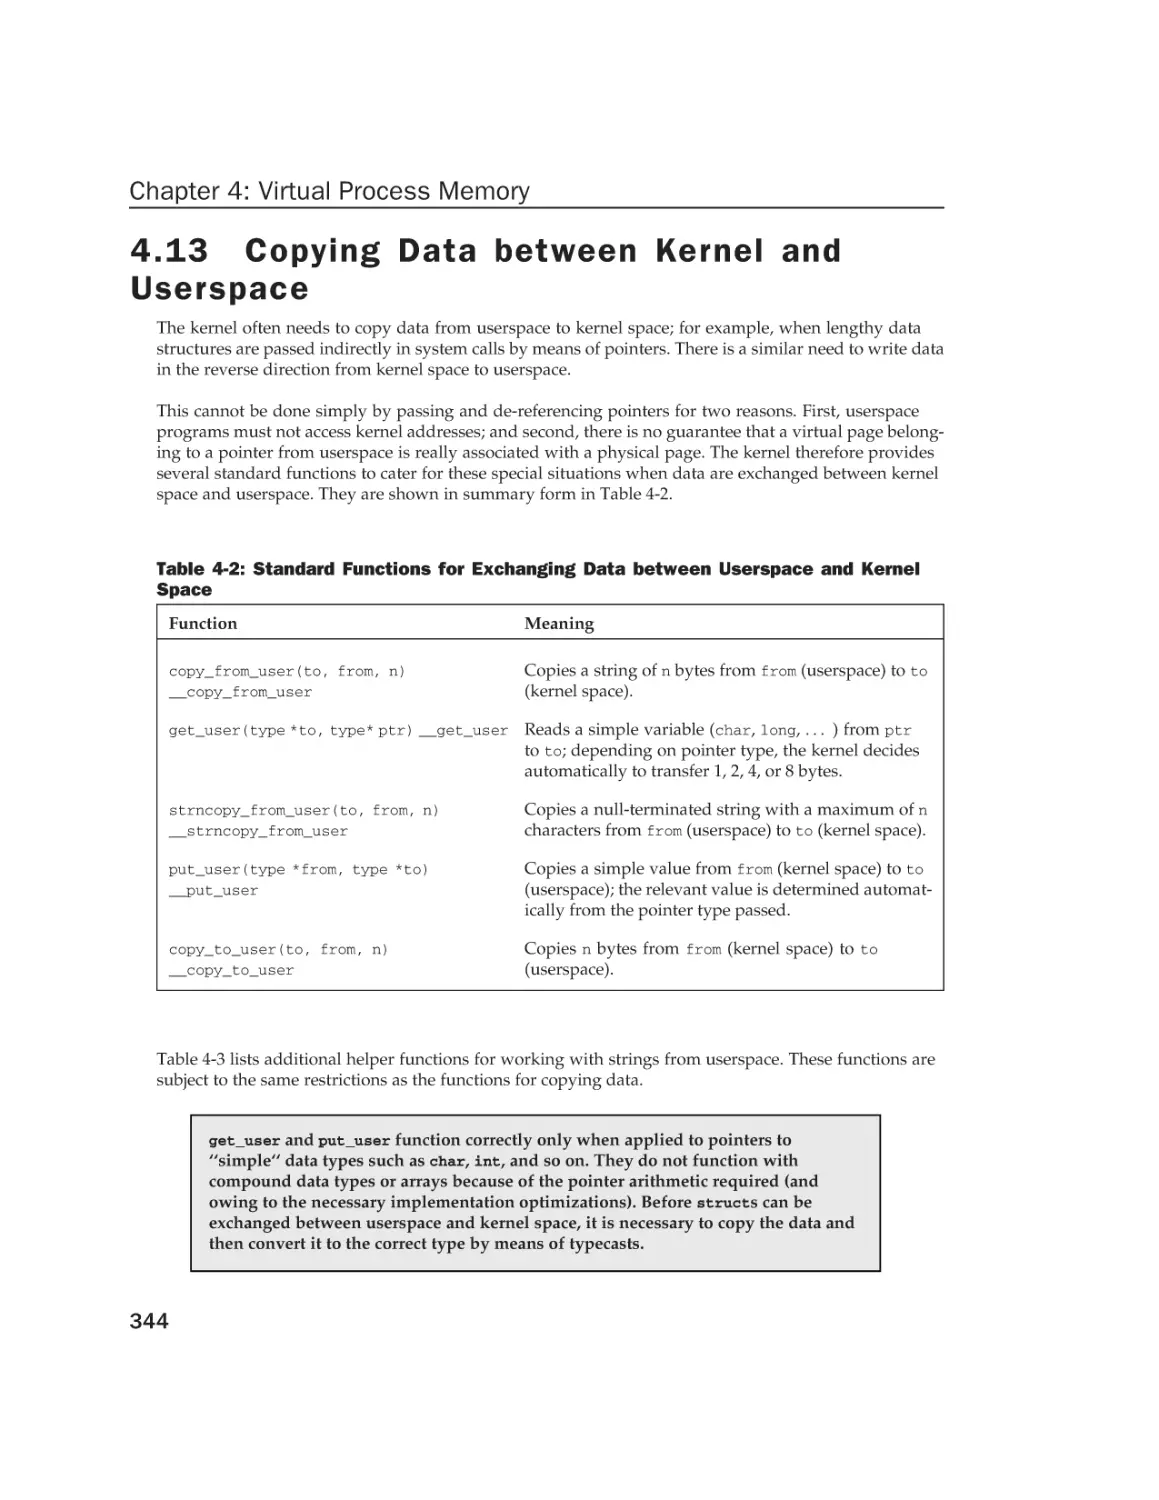 4.13 Copying Data between Kernel and Userspace